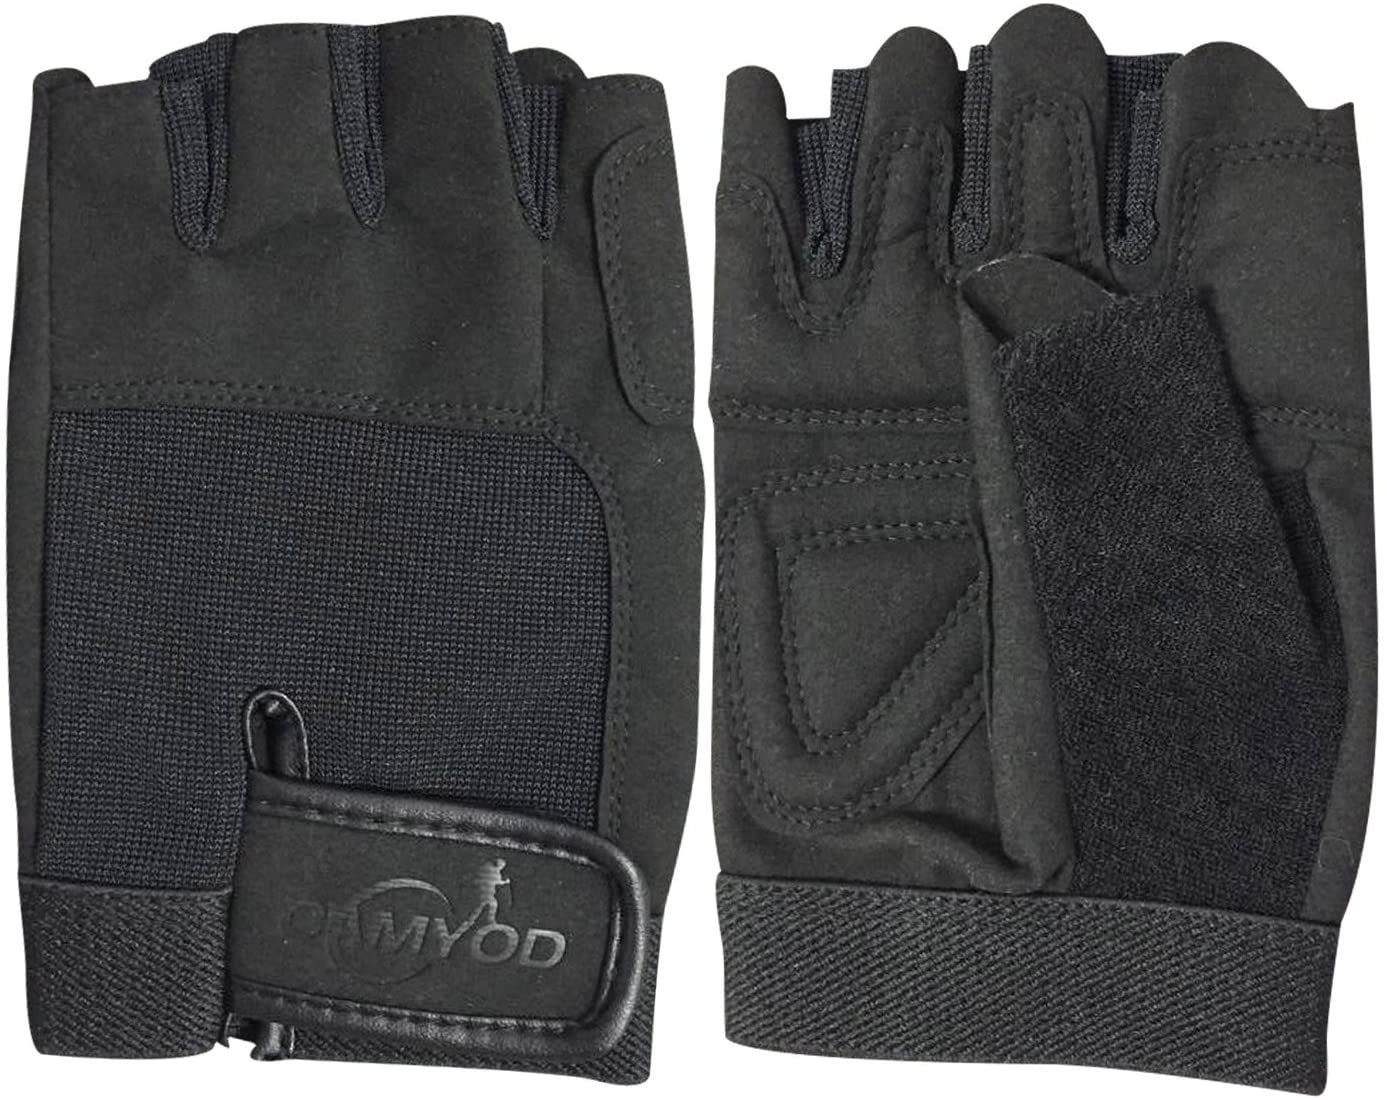 Choose mountain bike gloves with grip that are made of synthetic leather as this material is water and windproof.